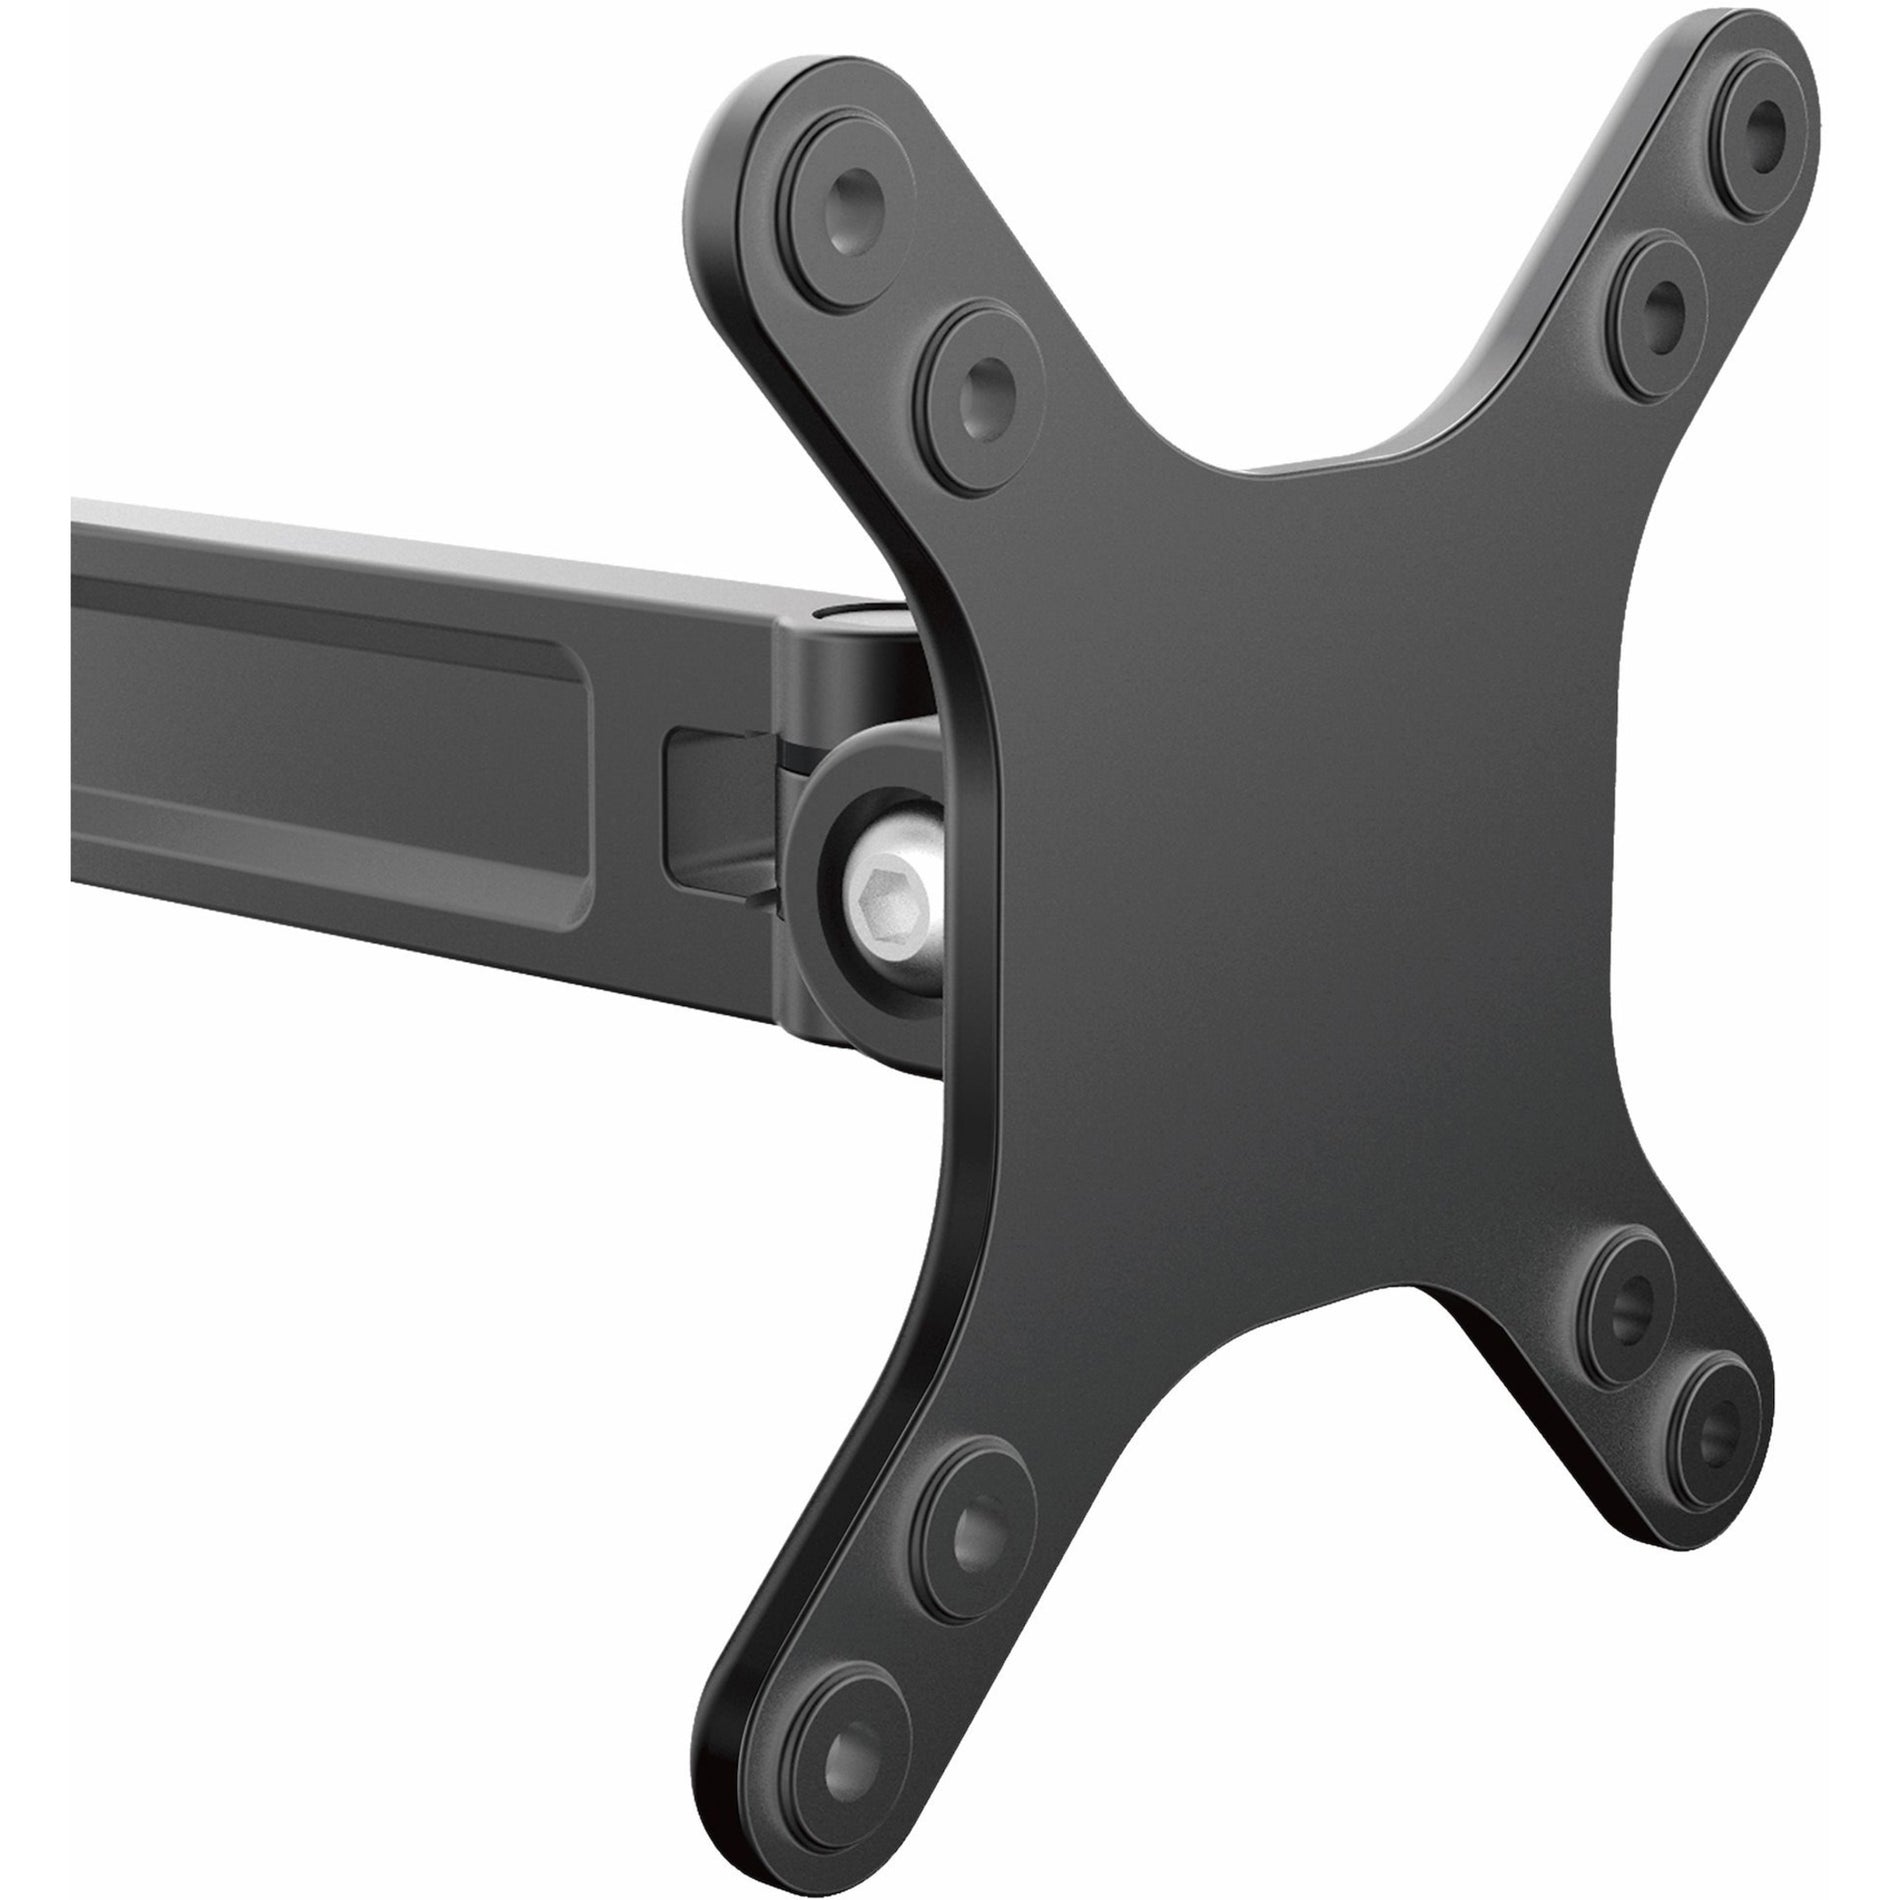 StarTech.com ARMWALLS Wall Mount Monitor Arm - Single Swivel, Space Saving Design, Cable Management, 33lb / 15kg Capacity